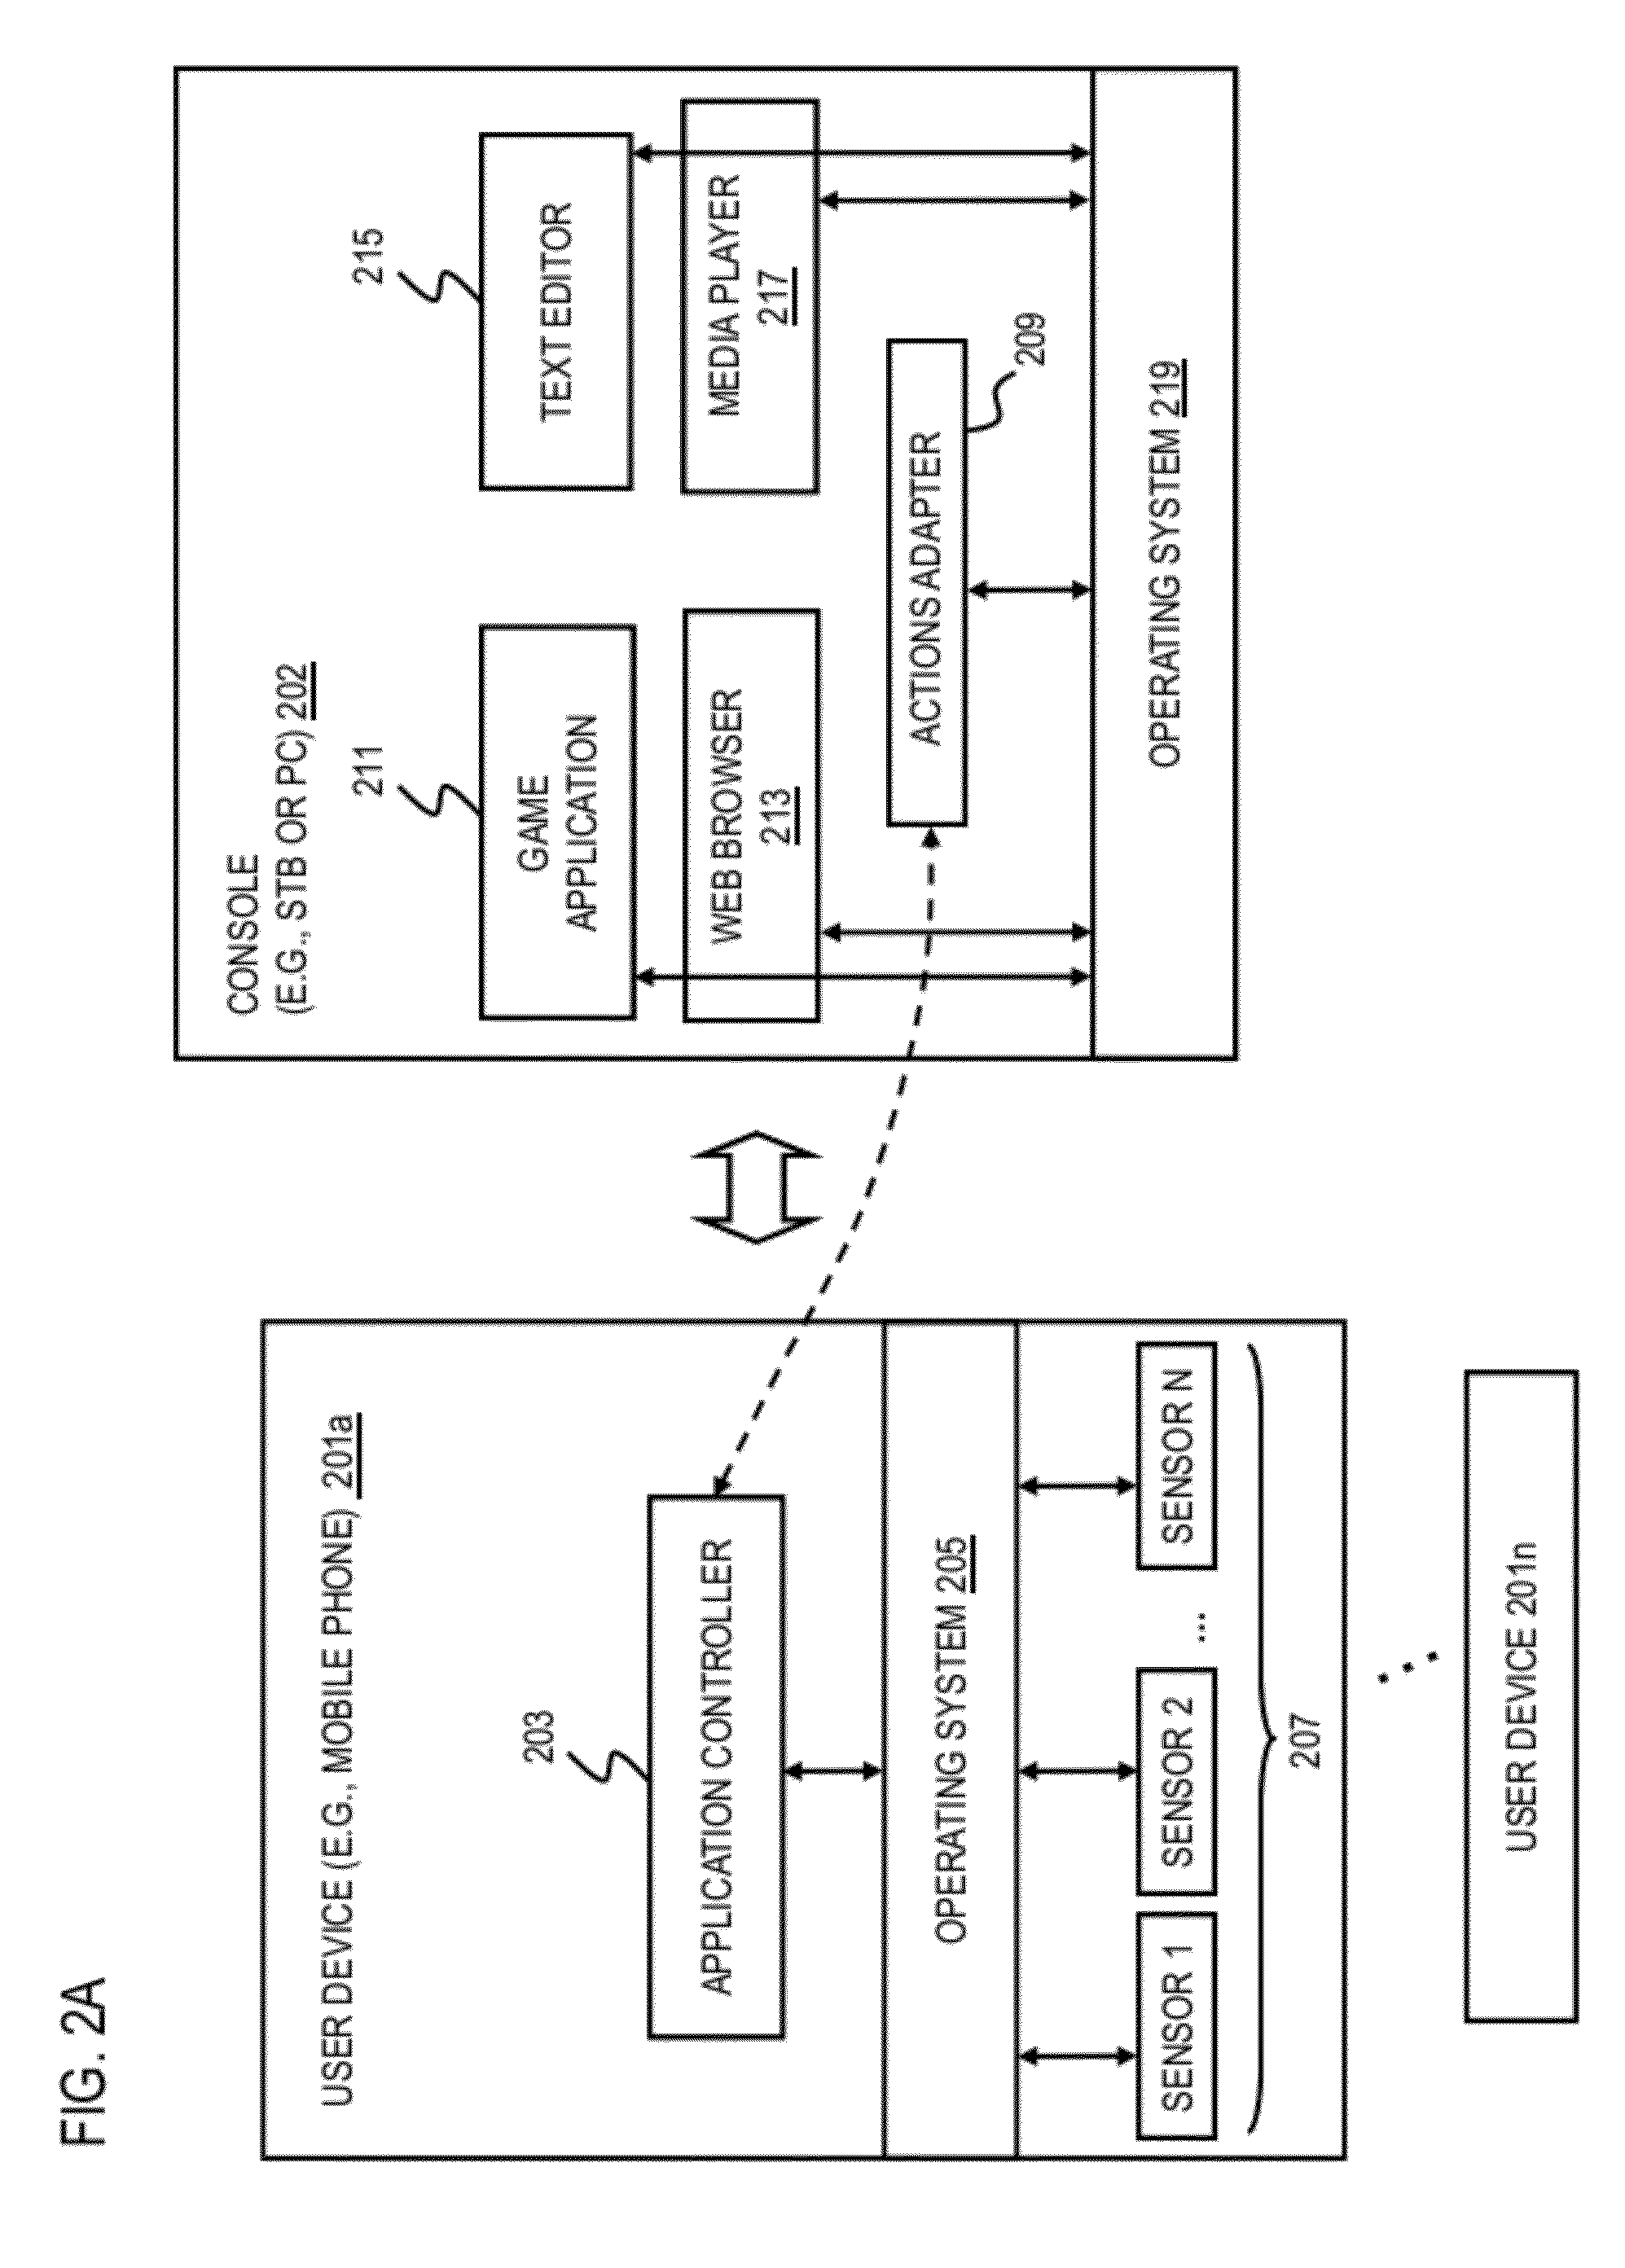 Method and apparatus for interacting with a set-top box based on sensor events from a user device